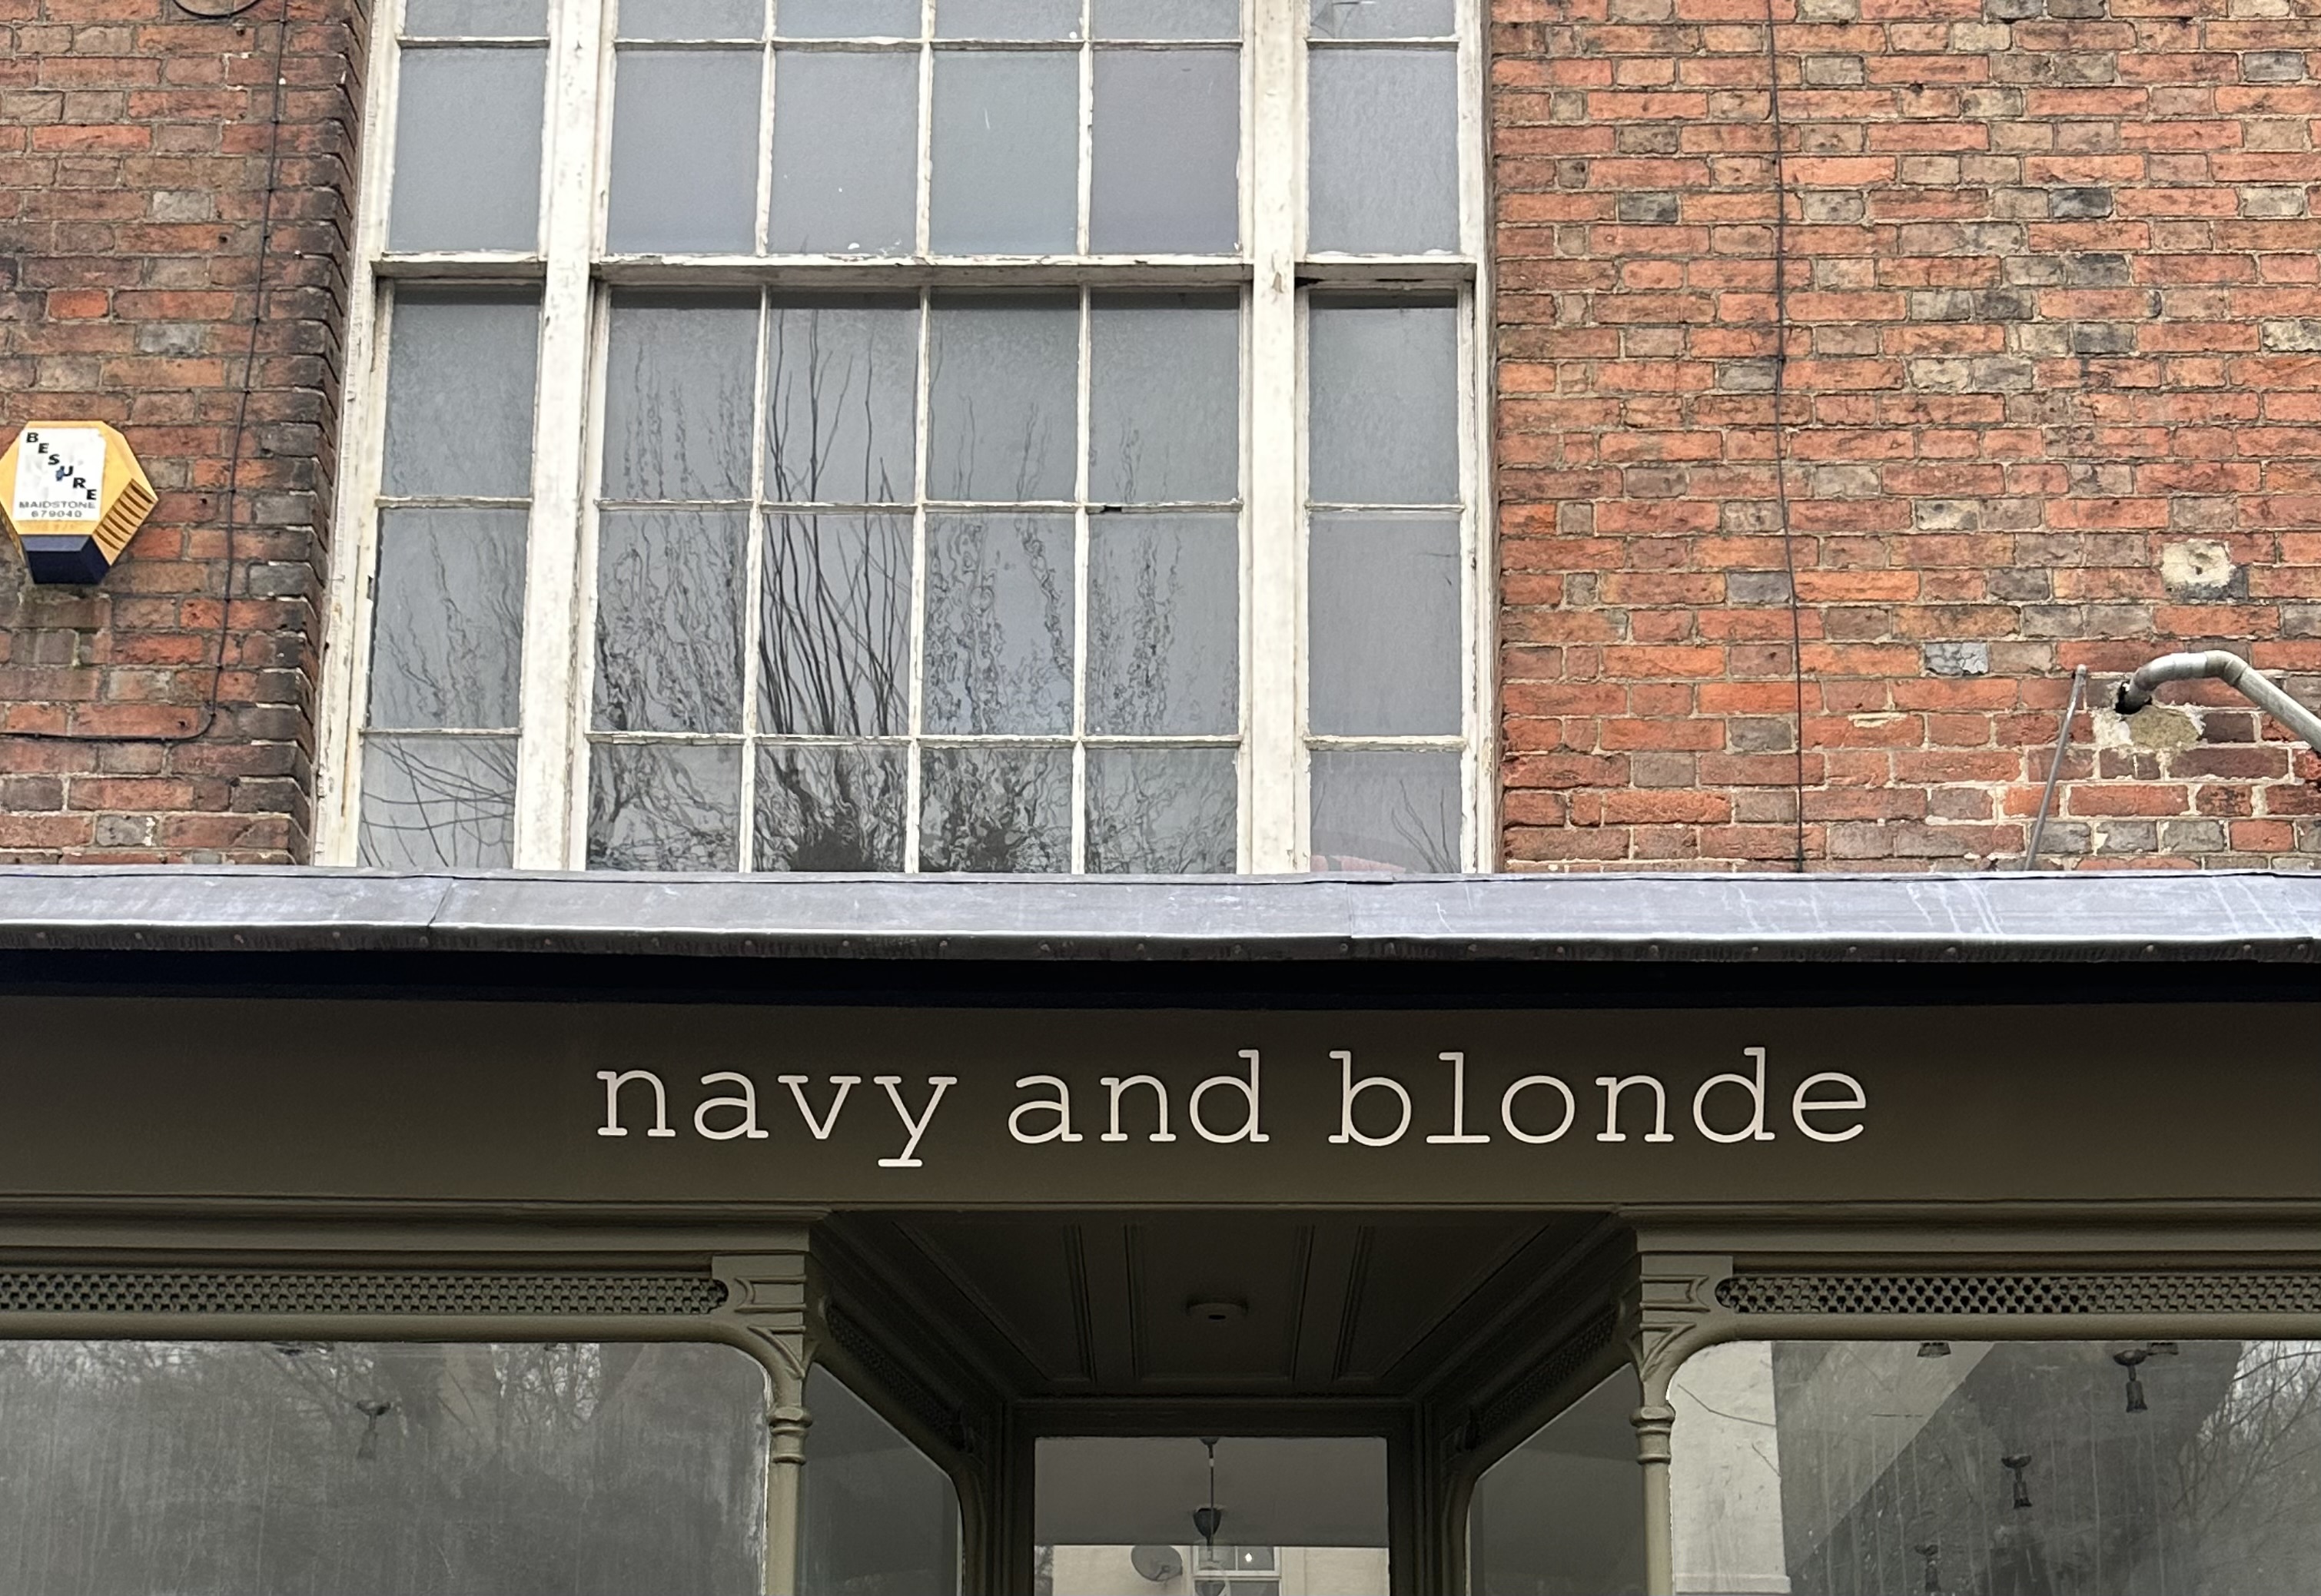 NAVY AND BLONDE